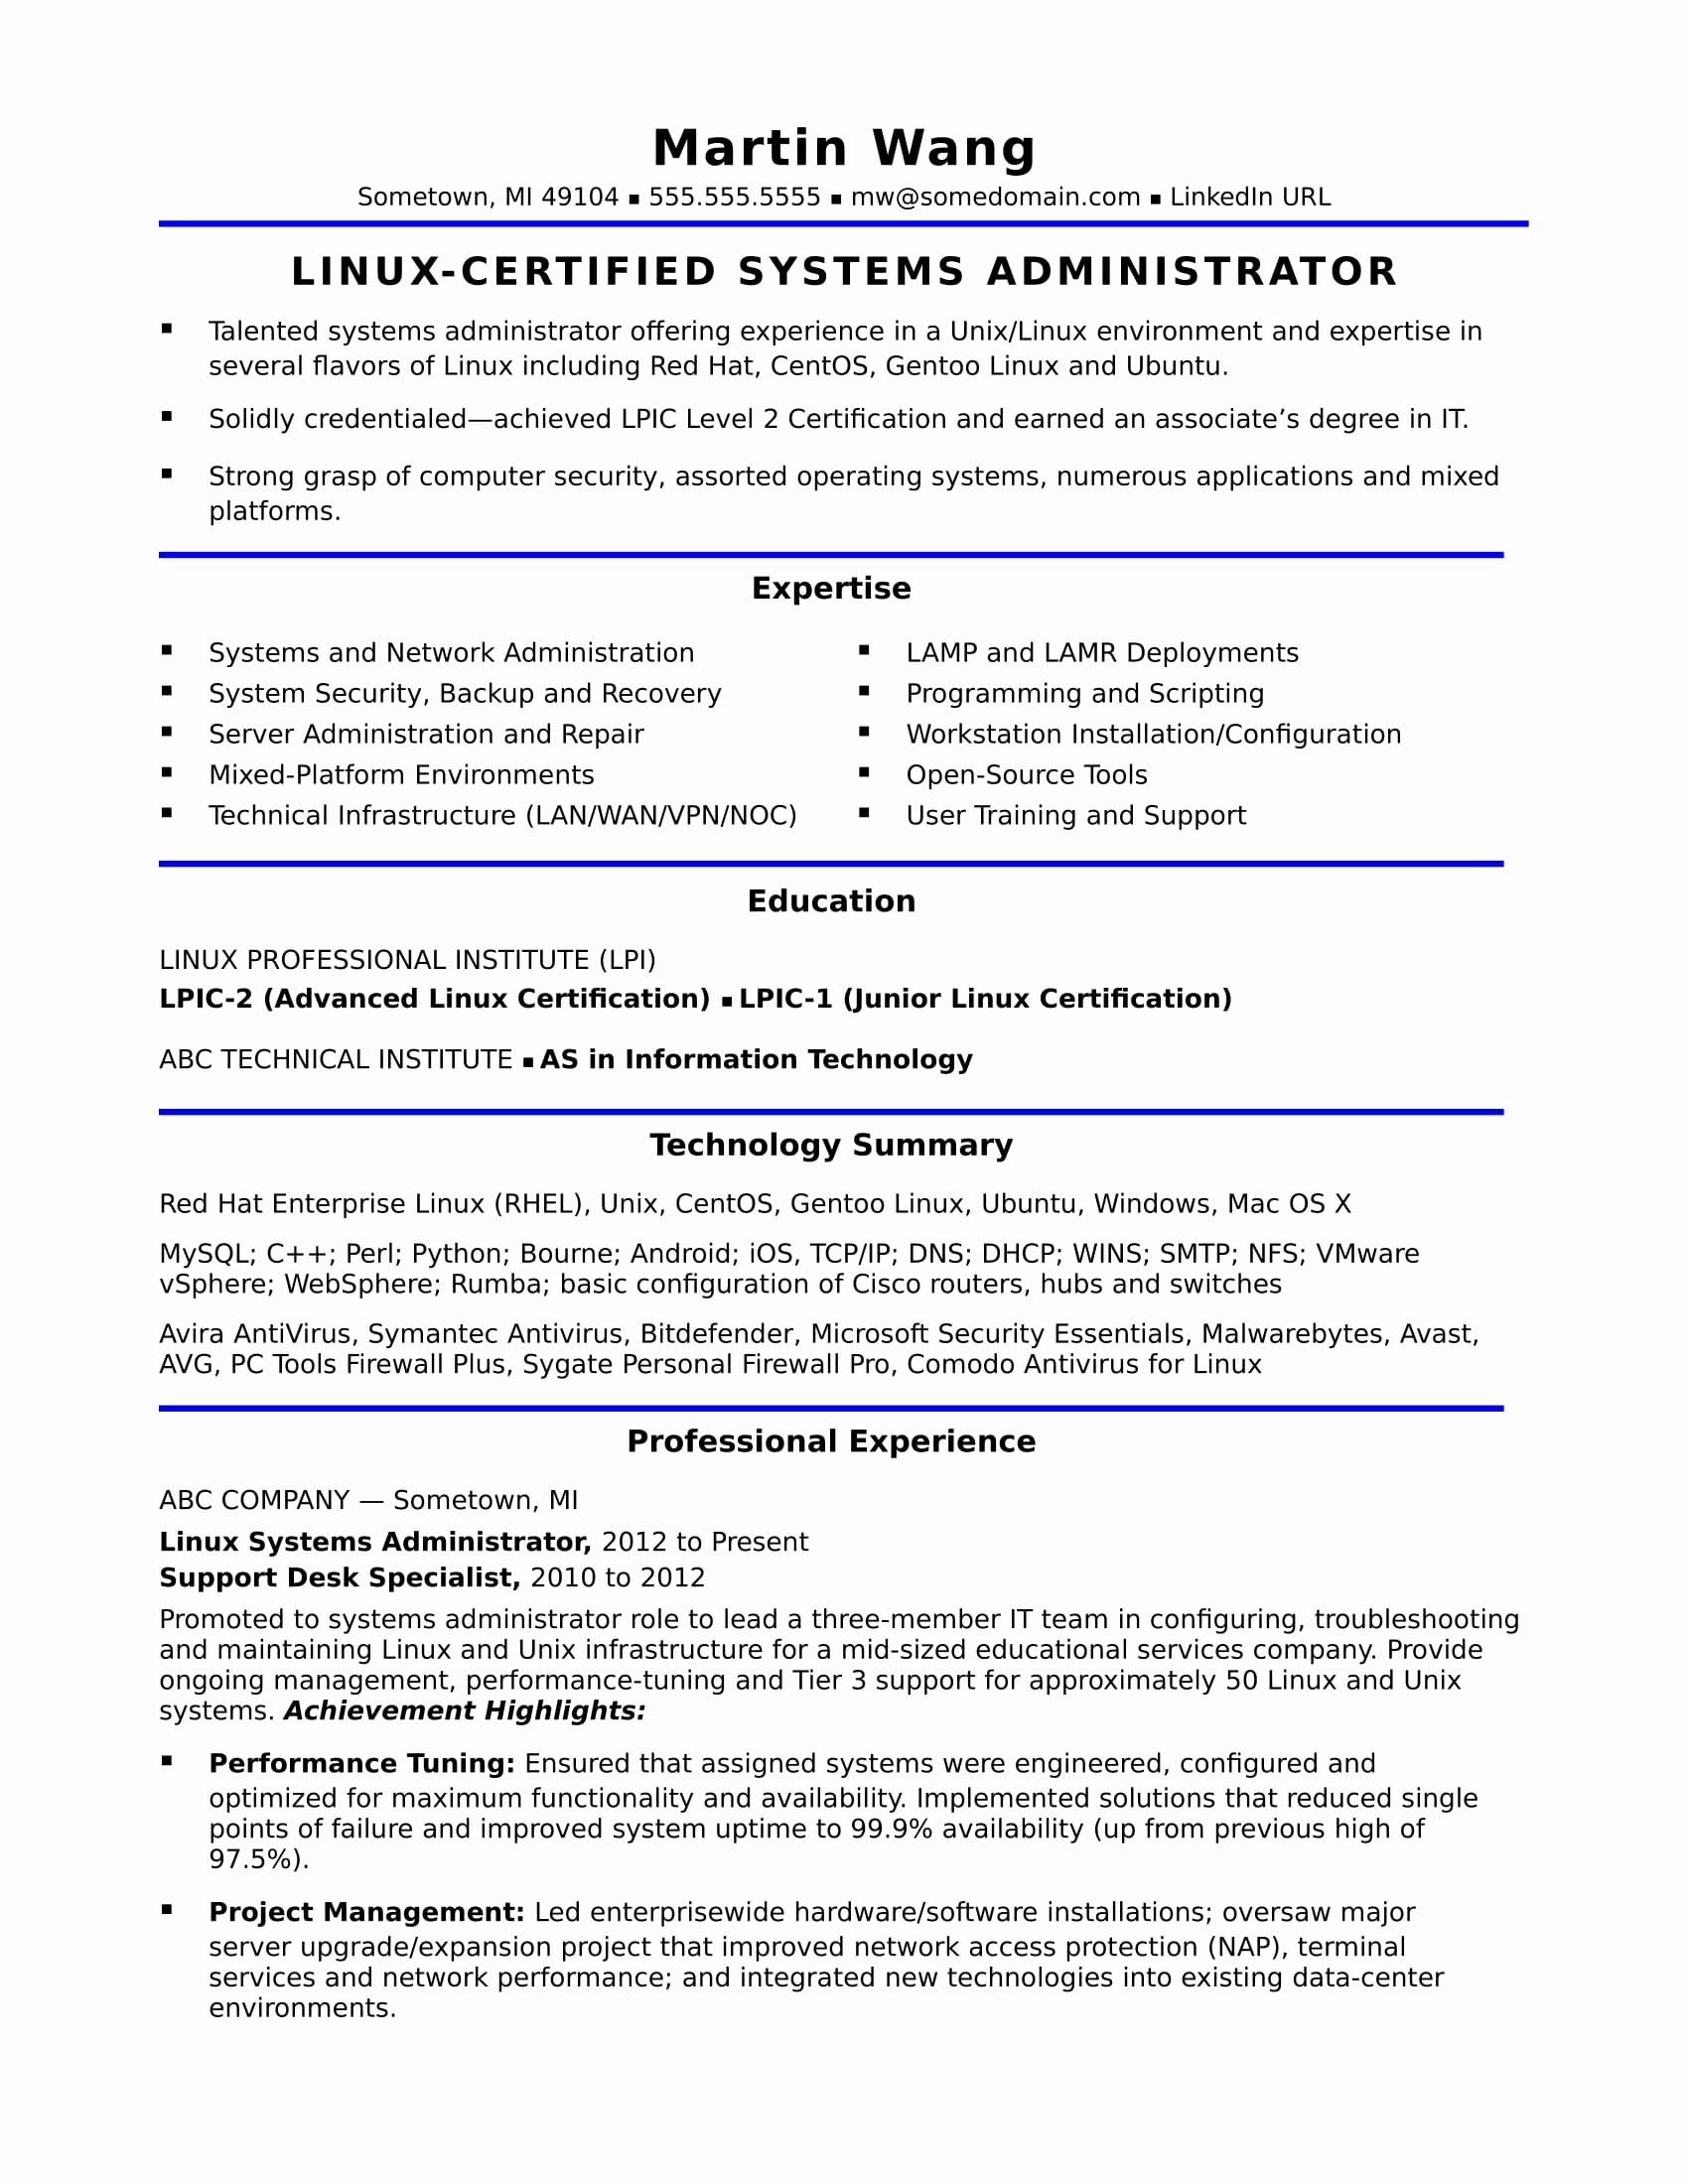 Sample Resume for A Midlevel Systems Administrator